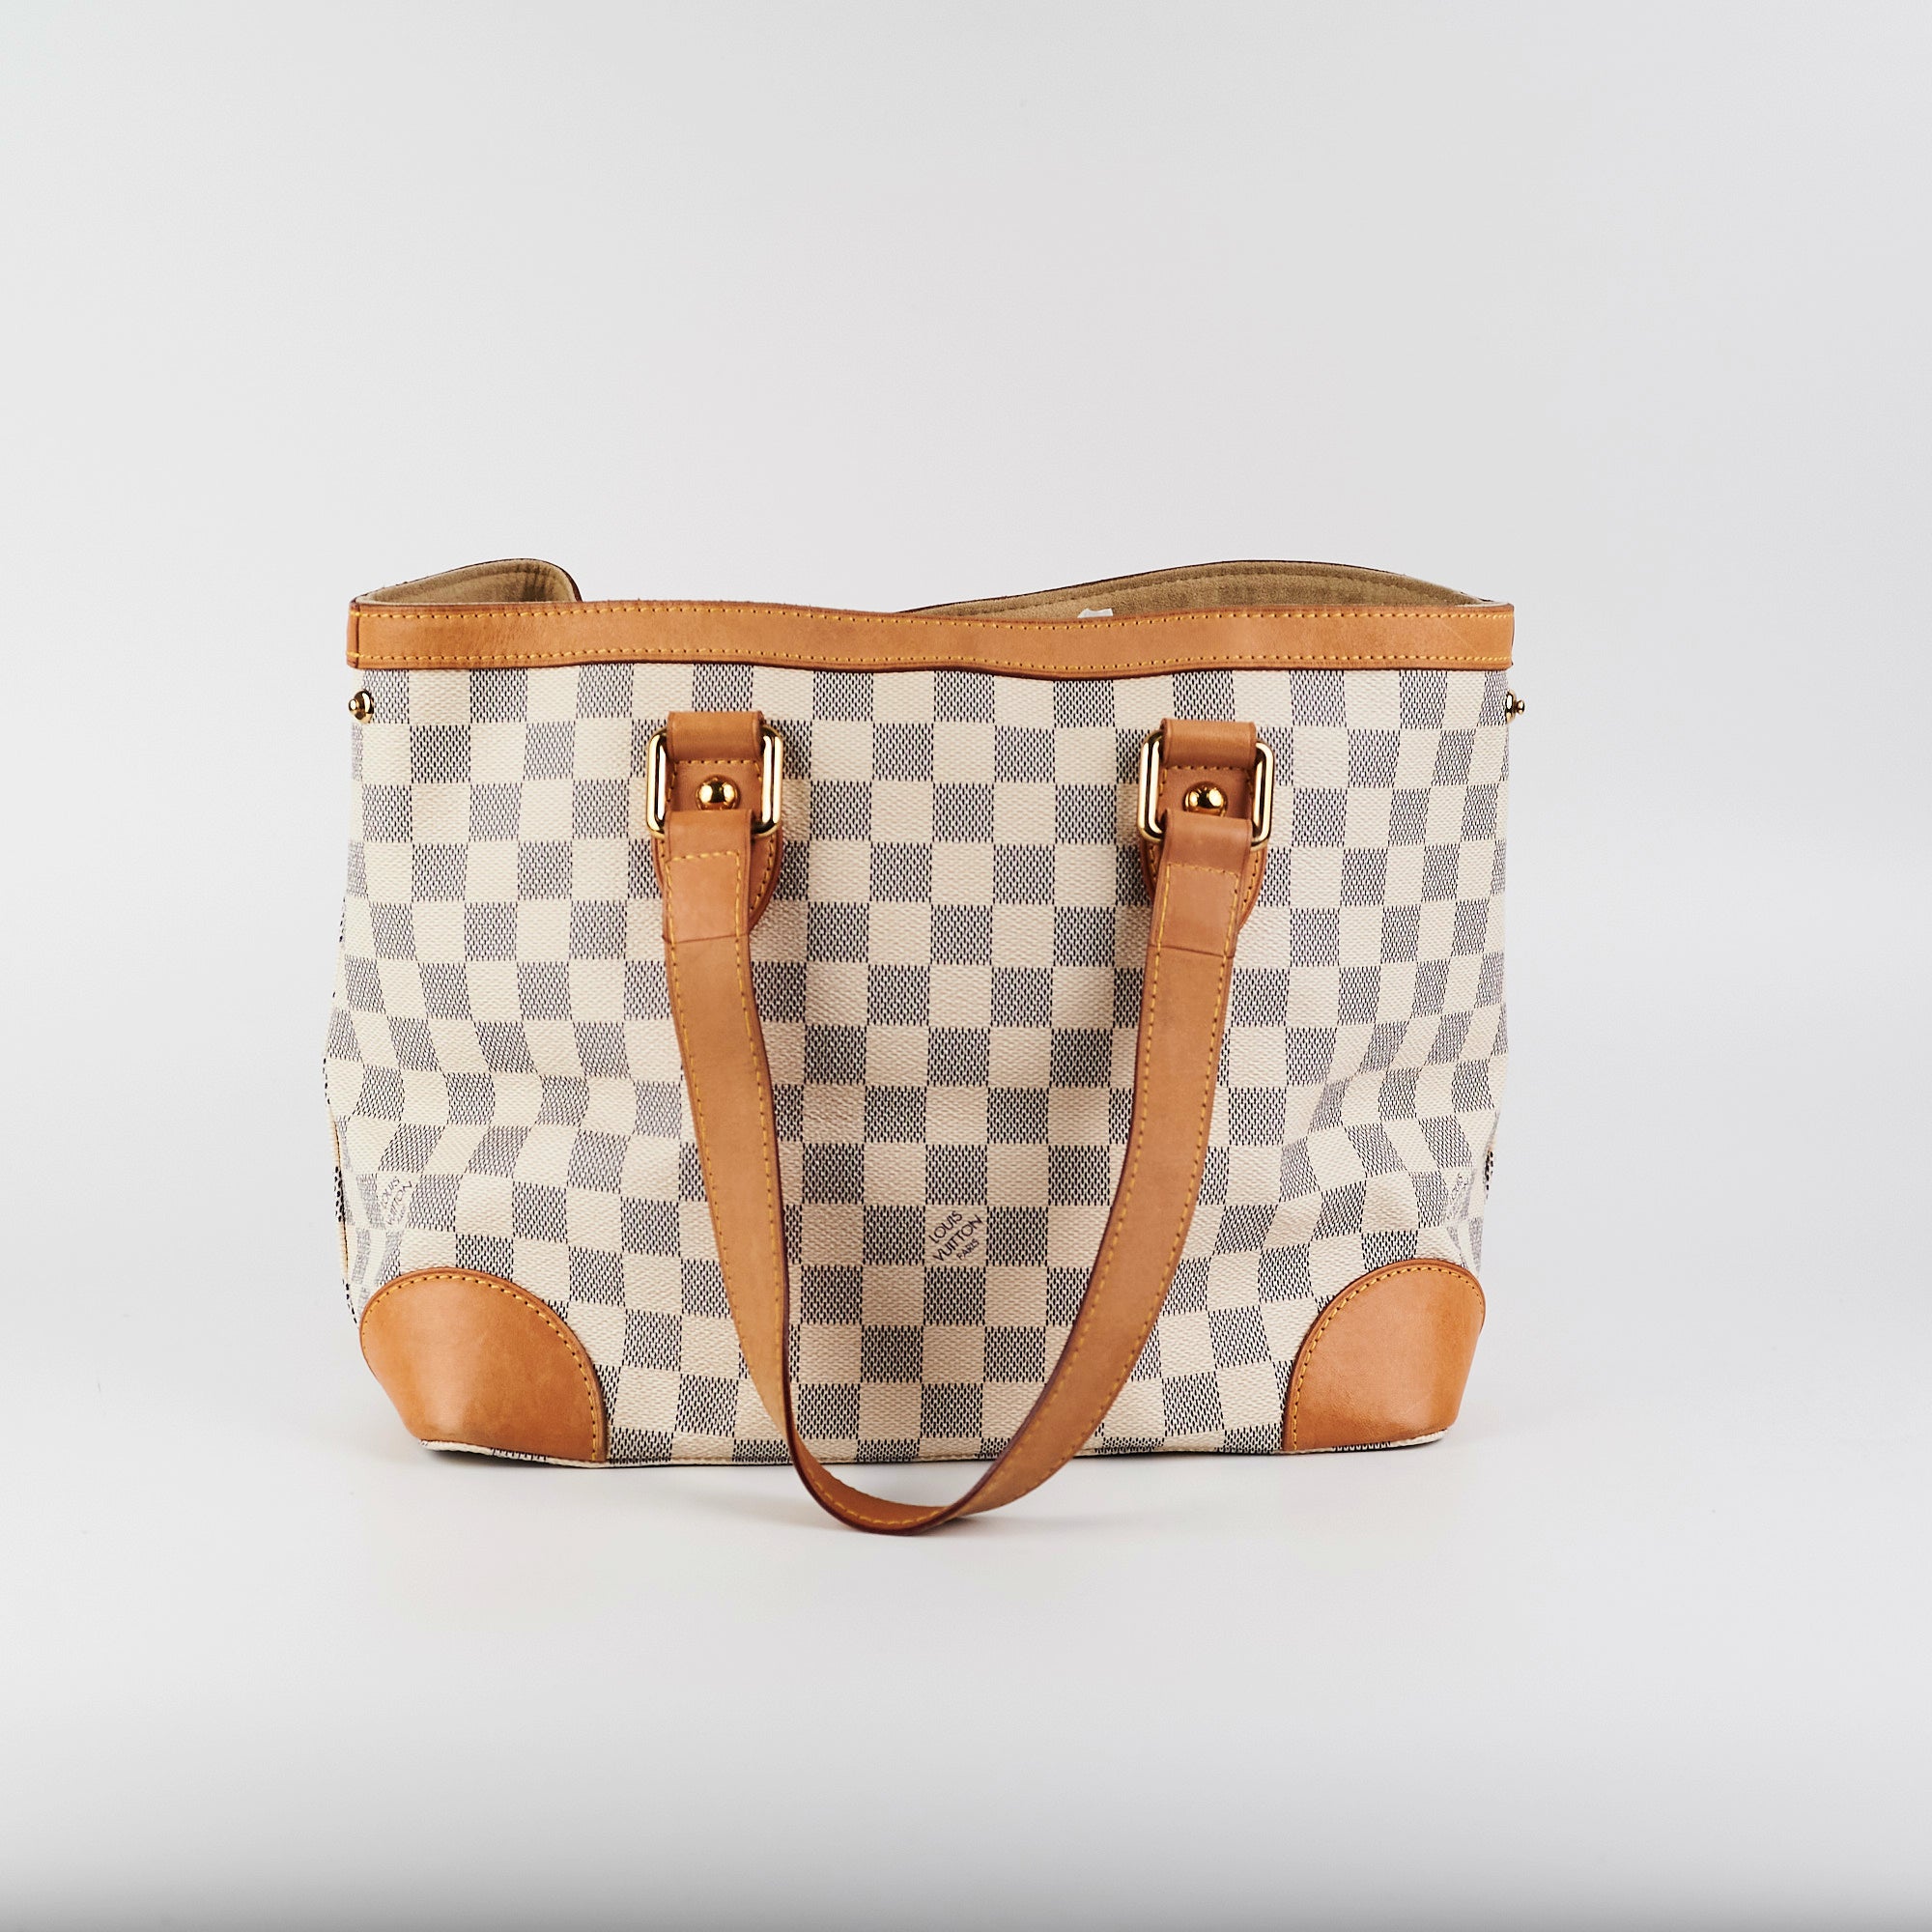 Shop for Louis Vuitton Damier Azur Canvas Leather Hampstead PM Bag -  Shipped from USA